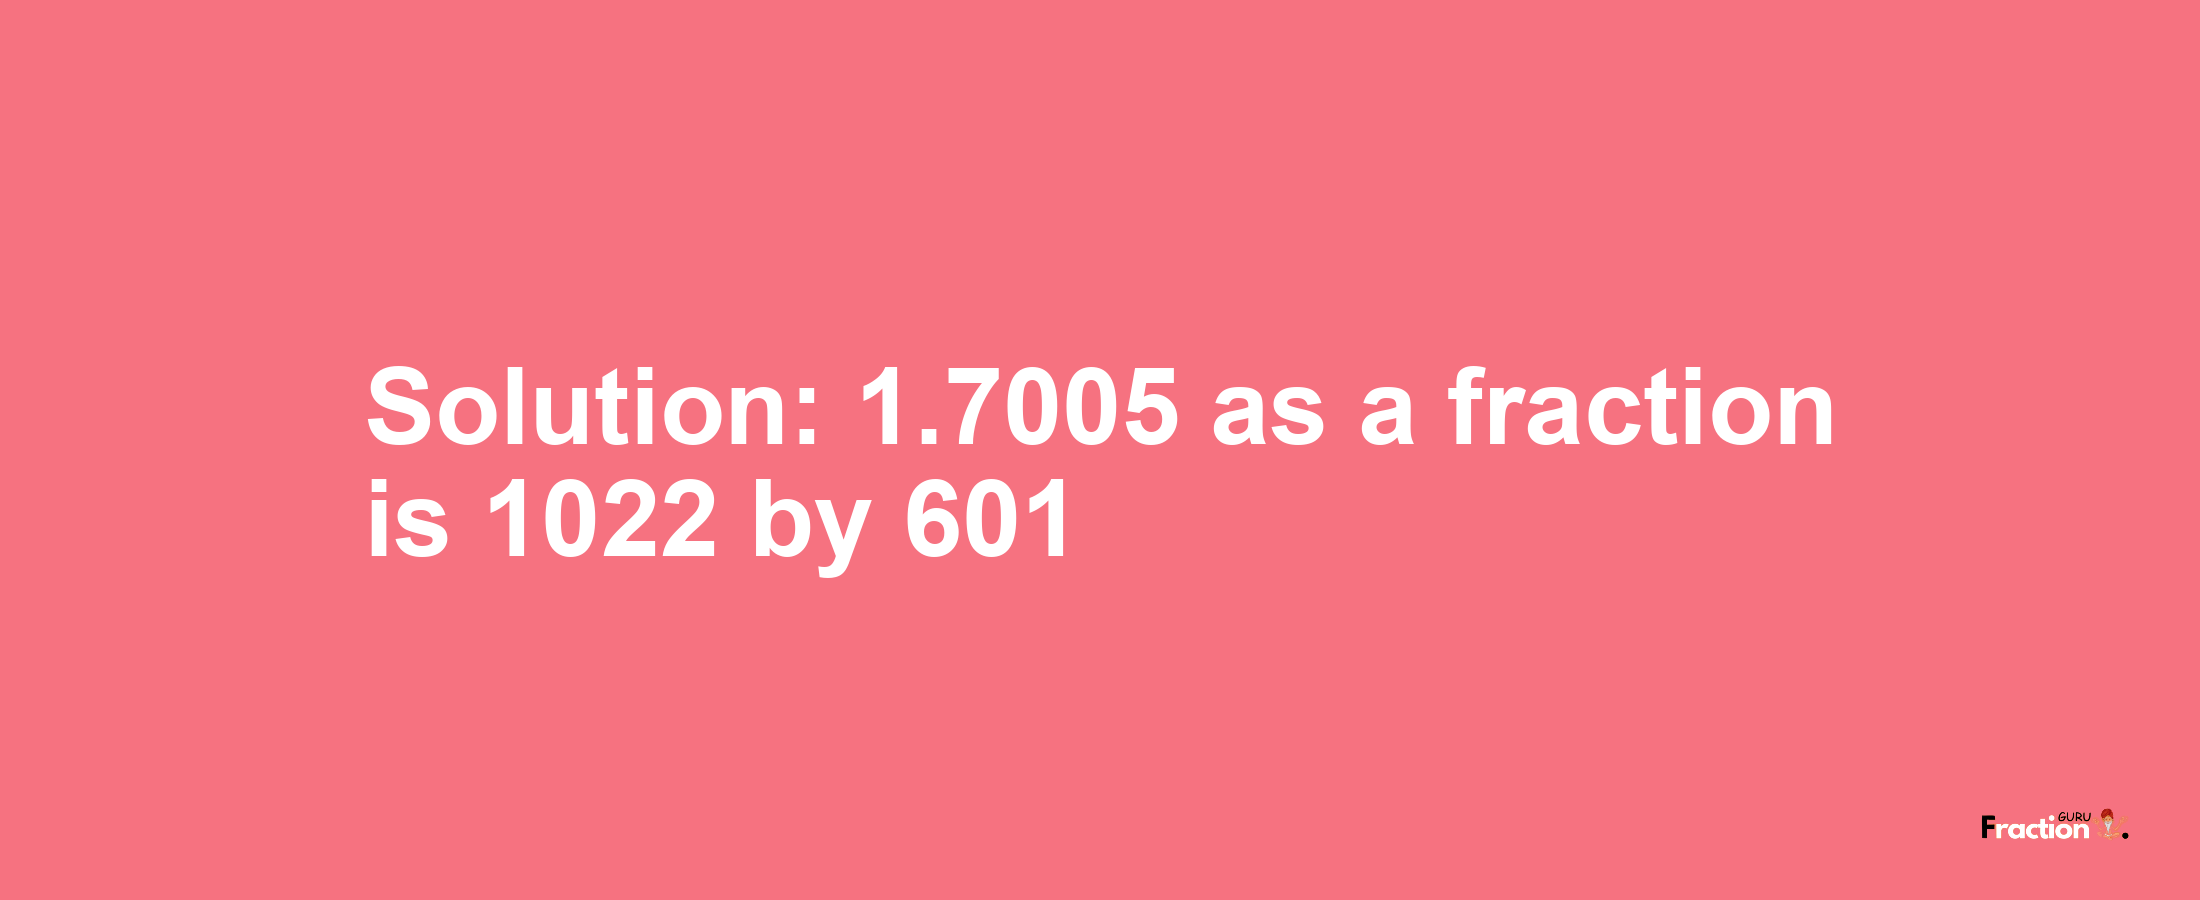 Solution:1.7005 as a fraction is 1022/601